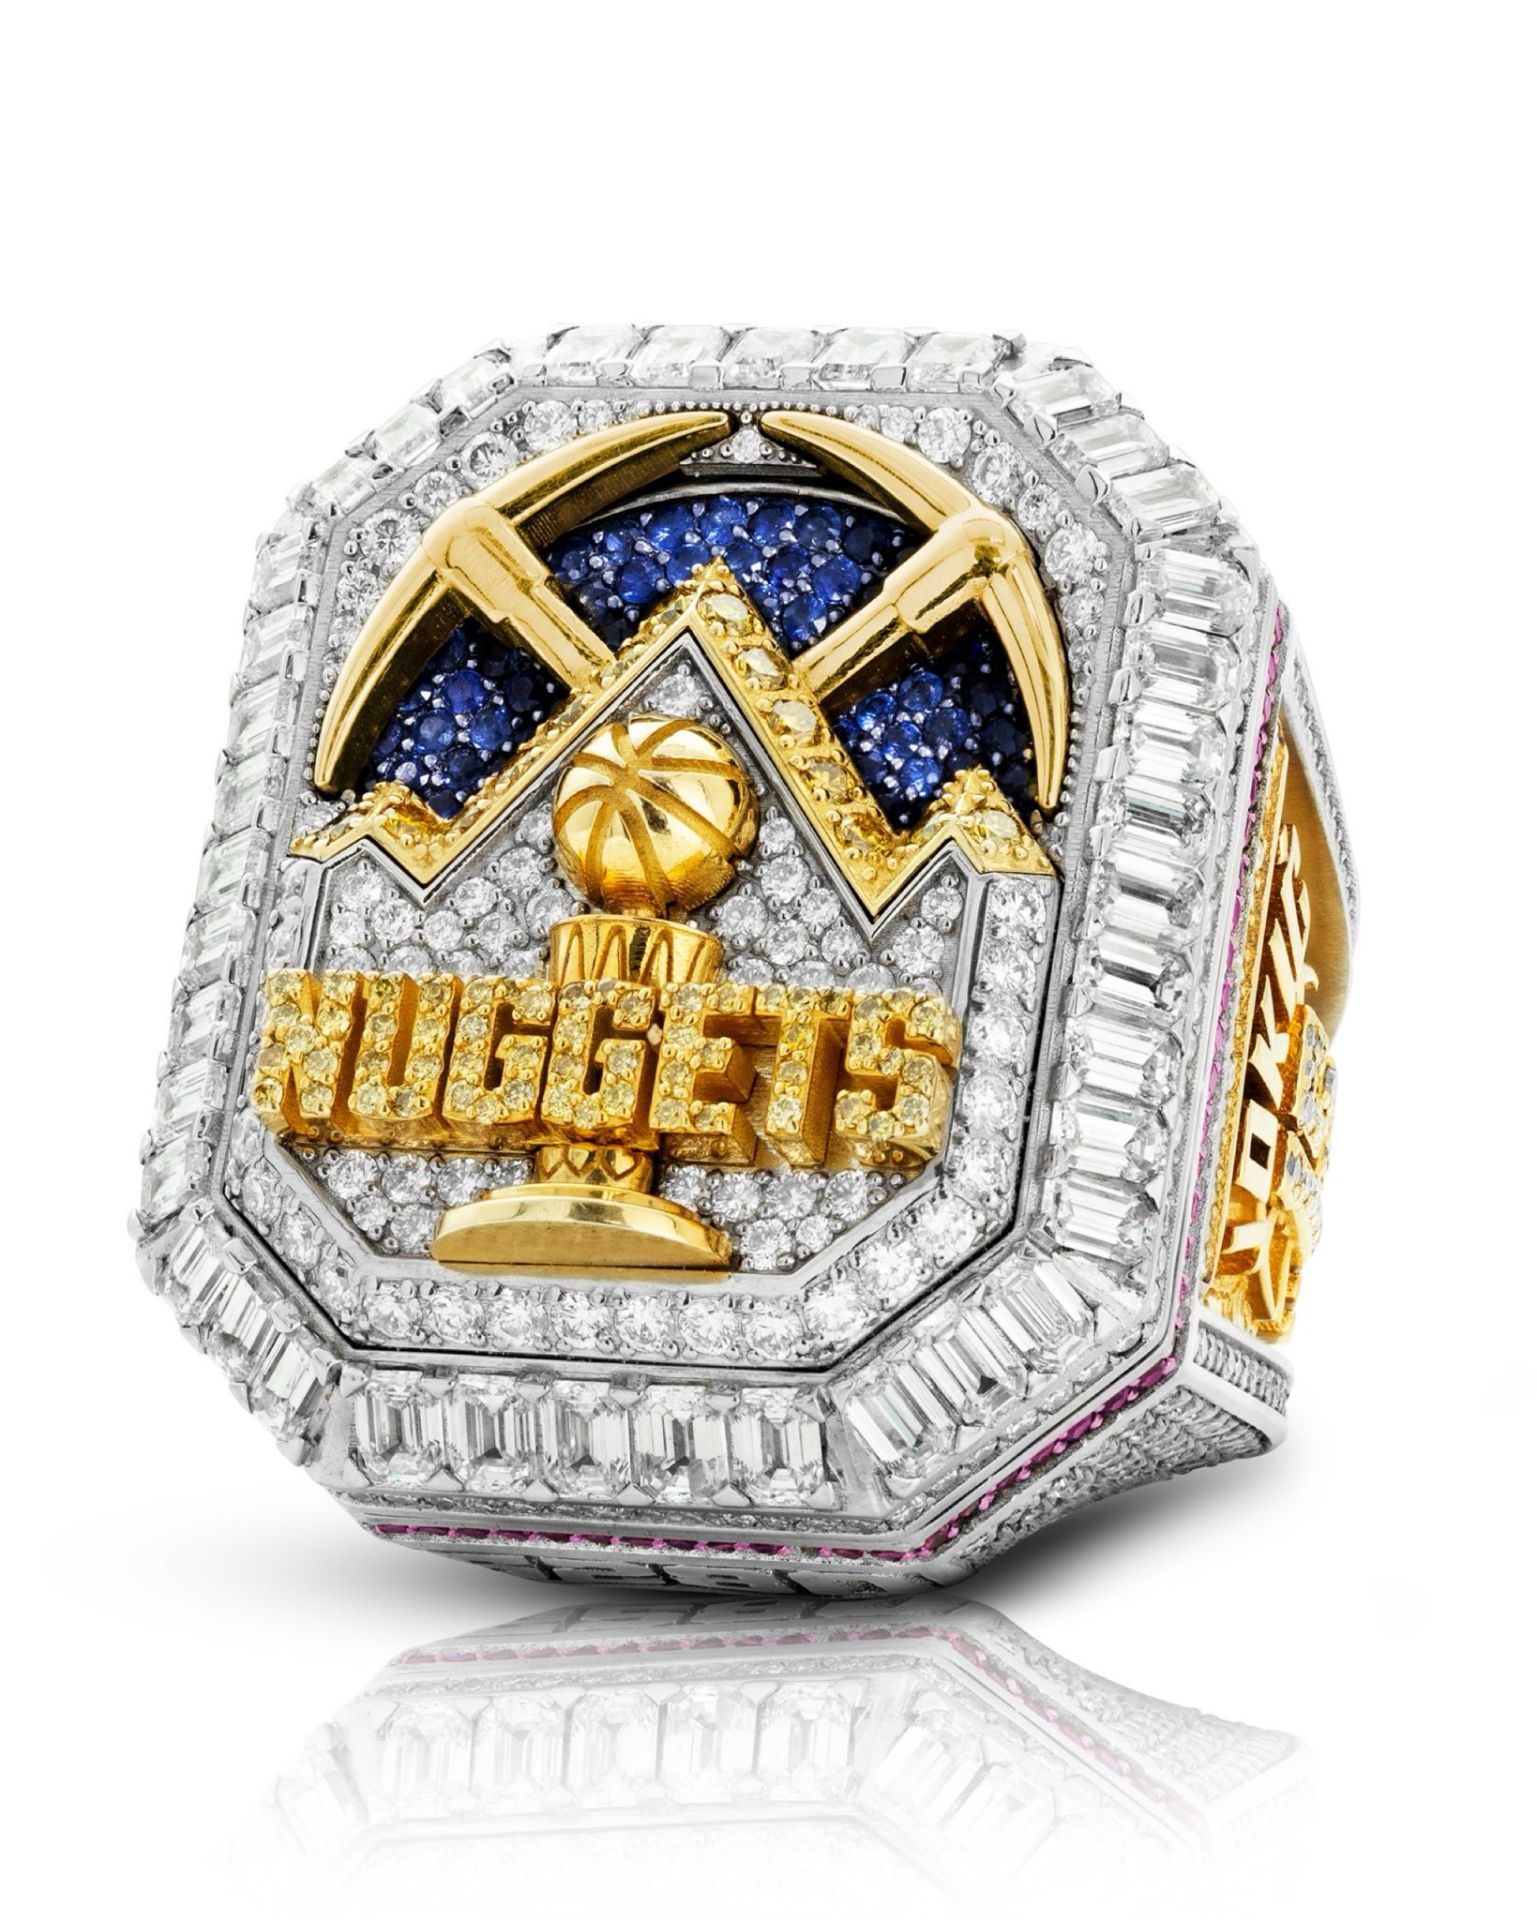 Denver Nuggets Celebrate Championship Glory With Unique Rings » Yours Truly